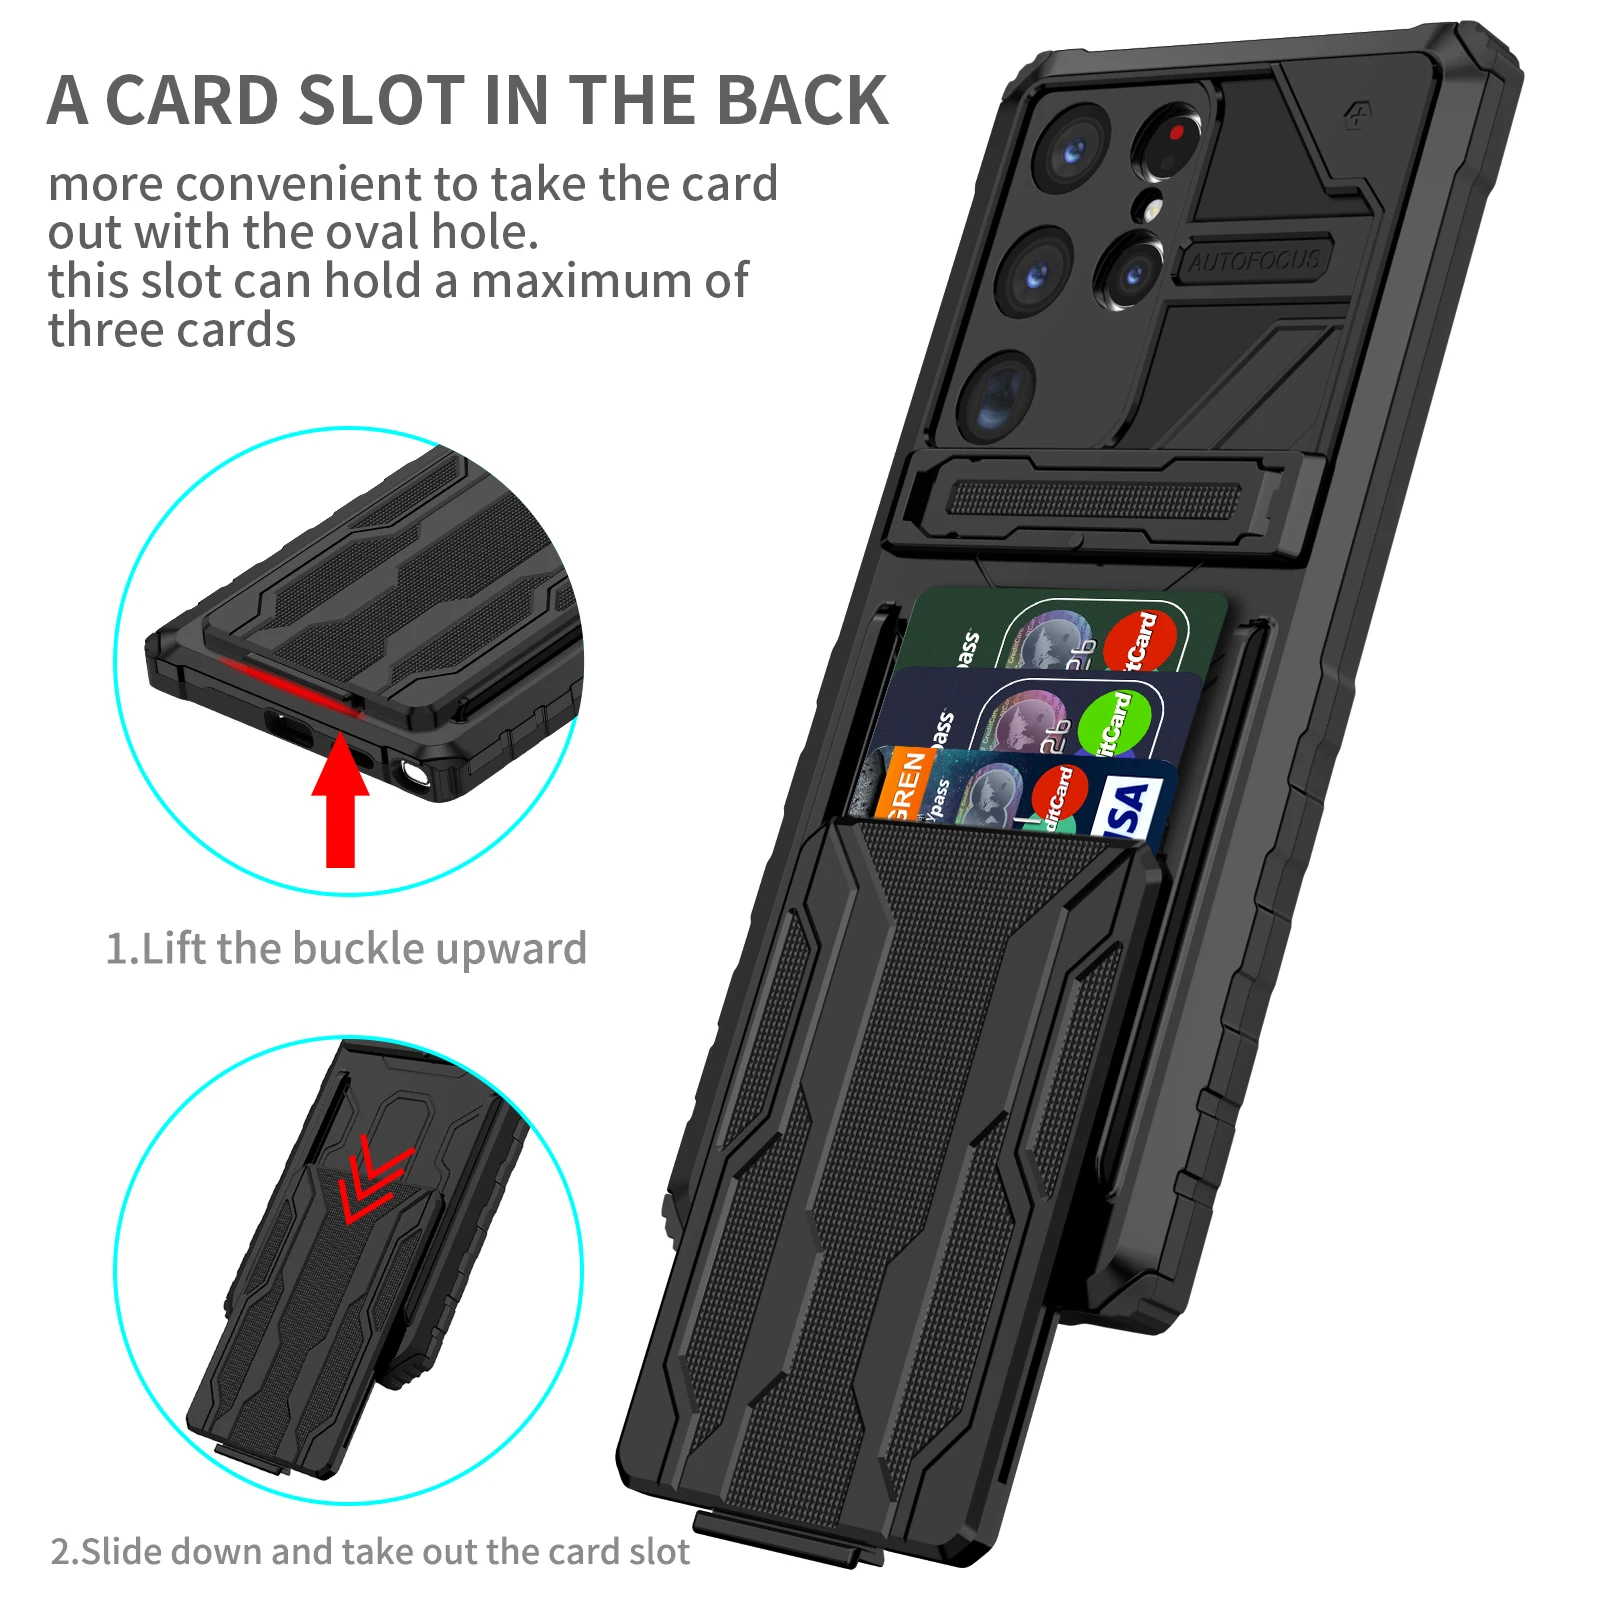 

Case For Samsung S23 S22 S21 Note 20 FE Ultra Plus Wallet With Credit Card Holder Stand Kickstand Slim Rugged Shockproof Cover